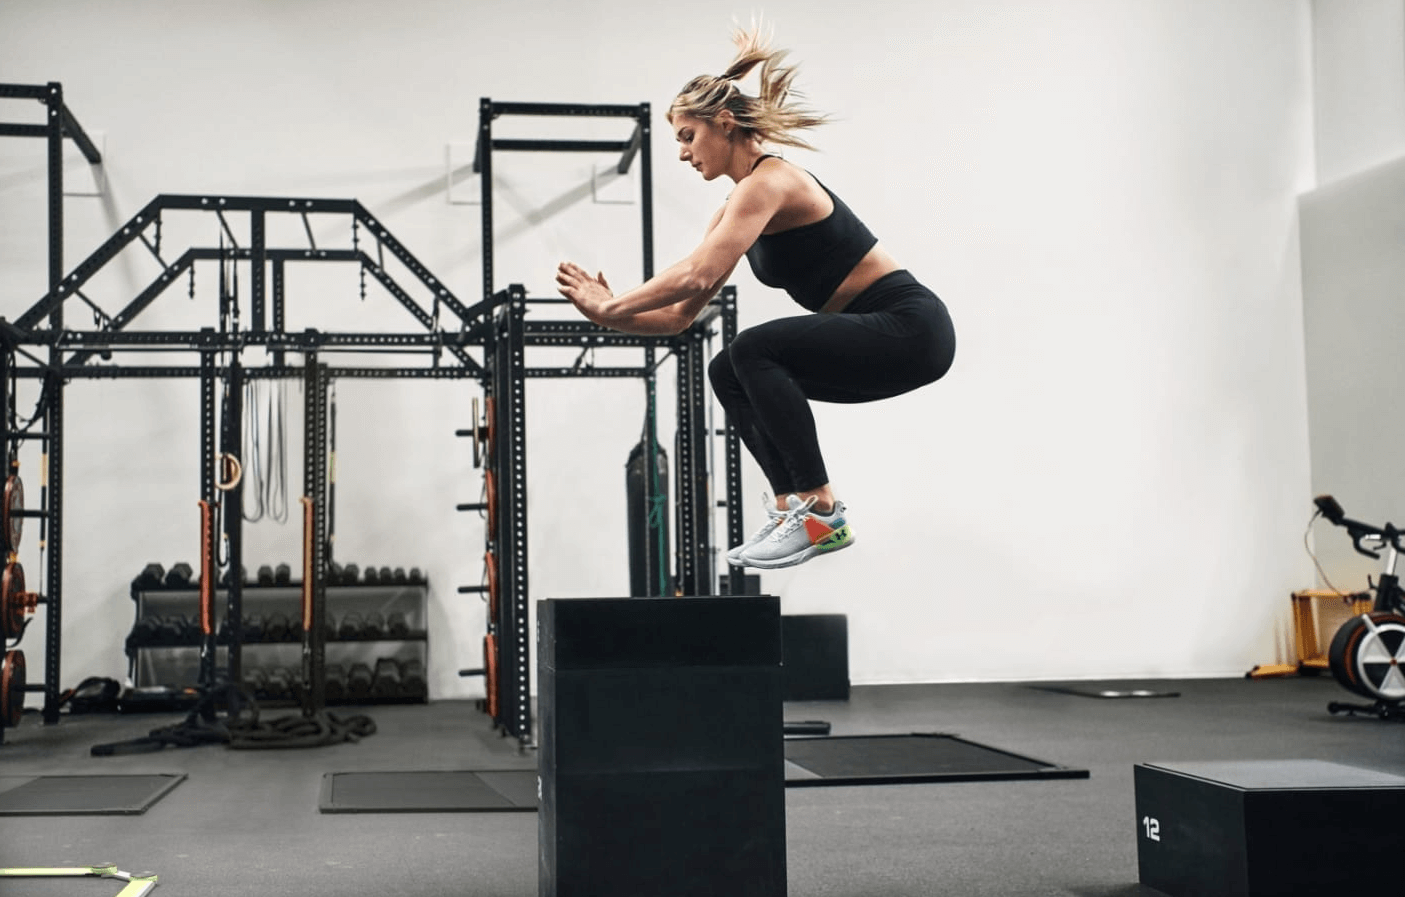 3 sets of box jumps will help you to get toned muscles